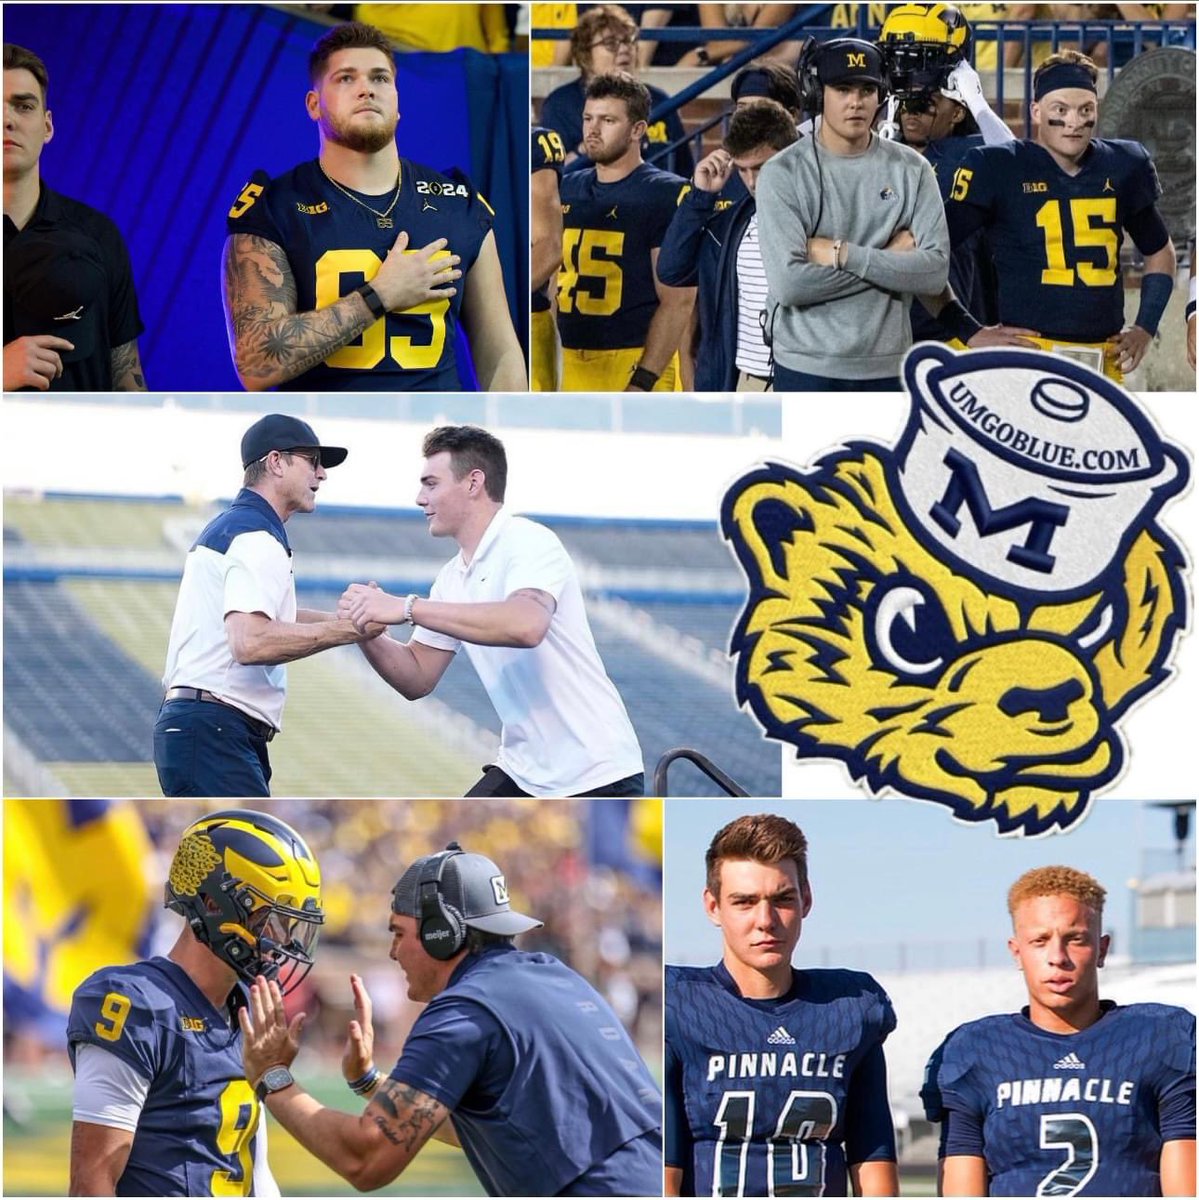 'Who's the guy next to Zak Zinter?!' That was a question we got a few times when we posted the picture from the National Championship game in the top left corner.... the answer?! Remember JD Johnson? He was a QB commit to Jim Harbaugh & the Wolverines in the class of 2020. JD